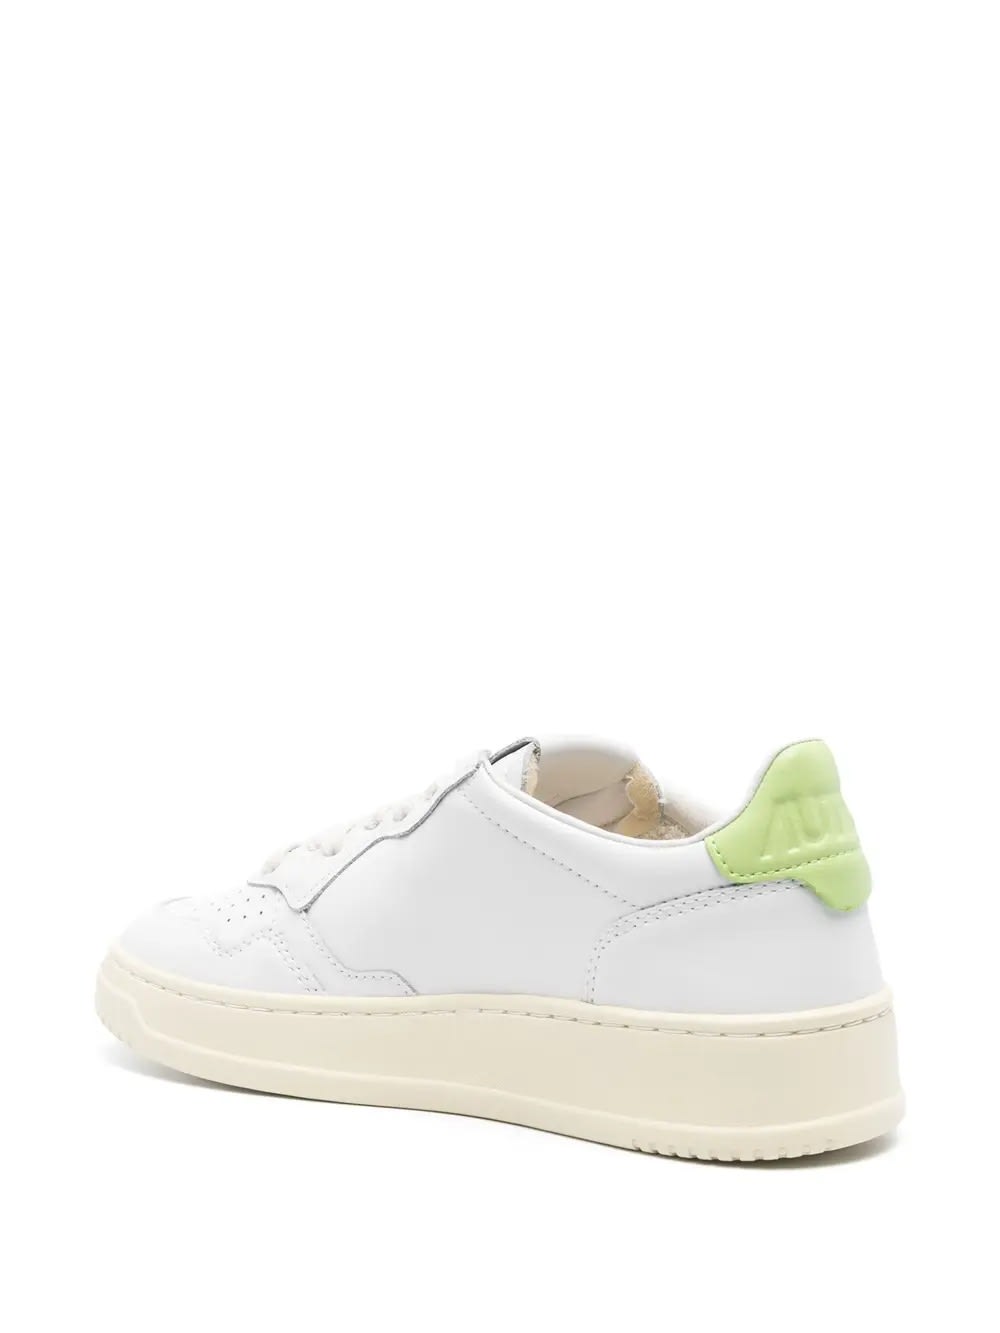 Shop Autry Medalist Low Sneakers In White And Green Leather